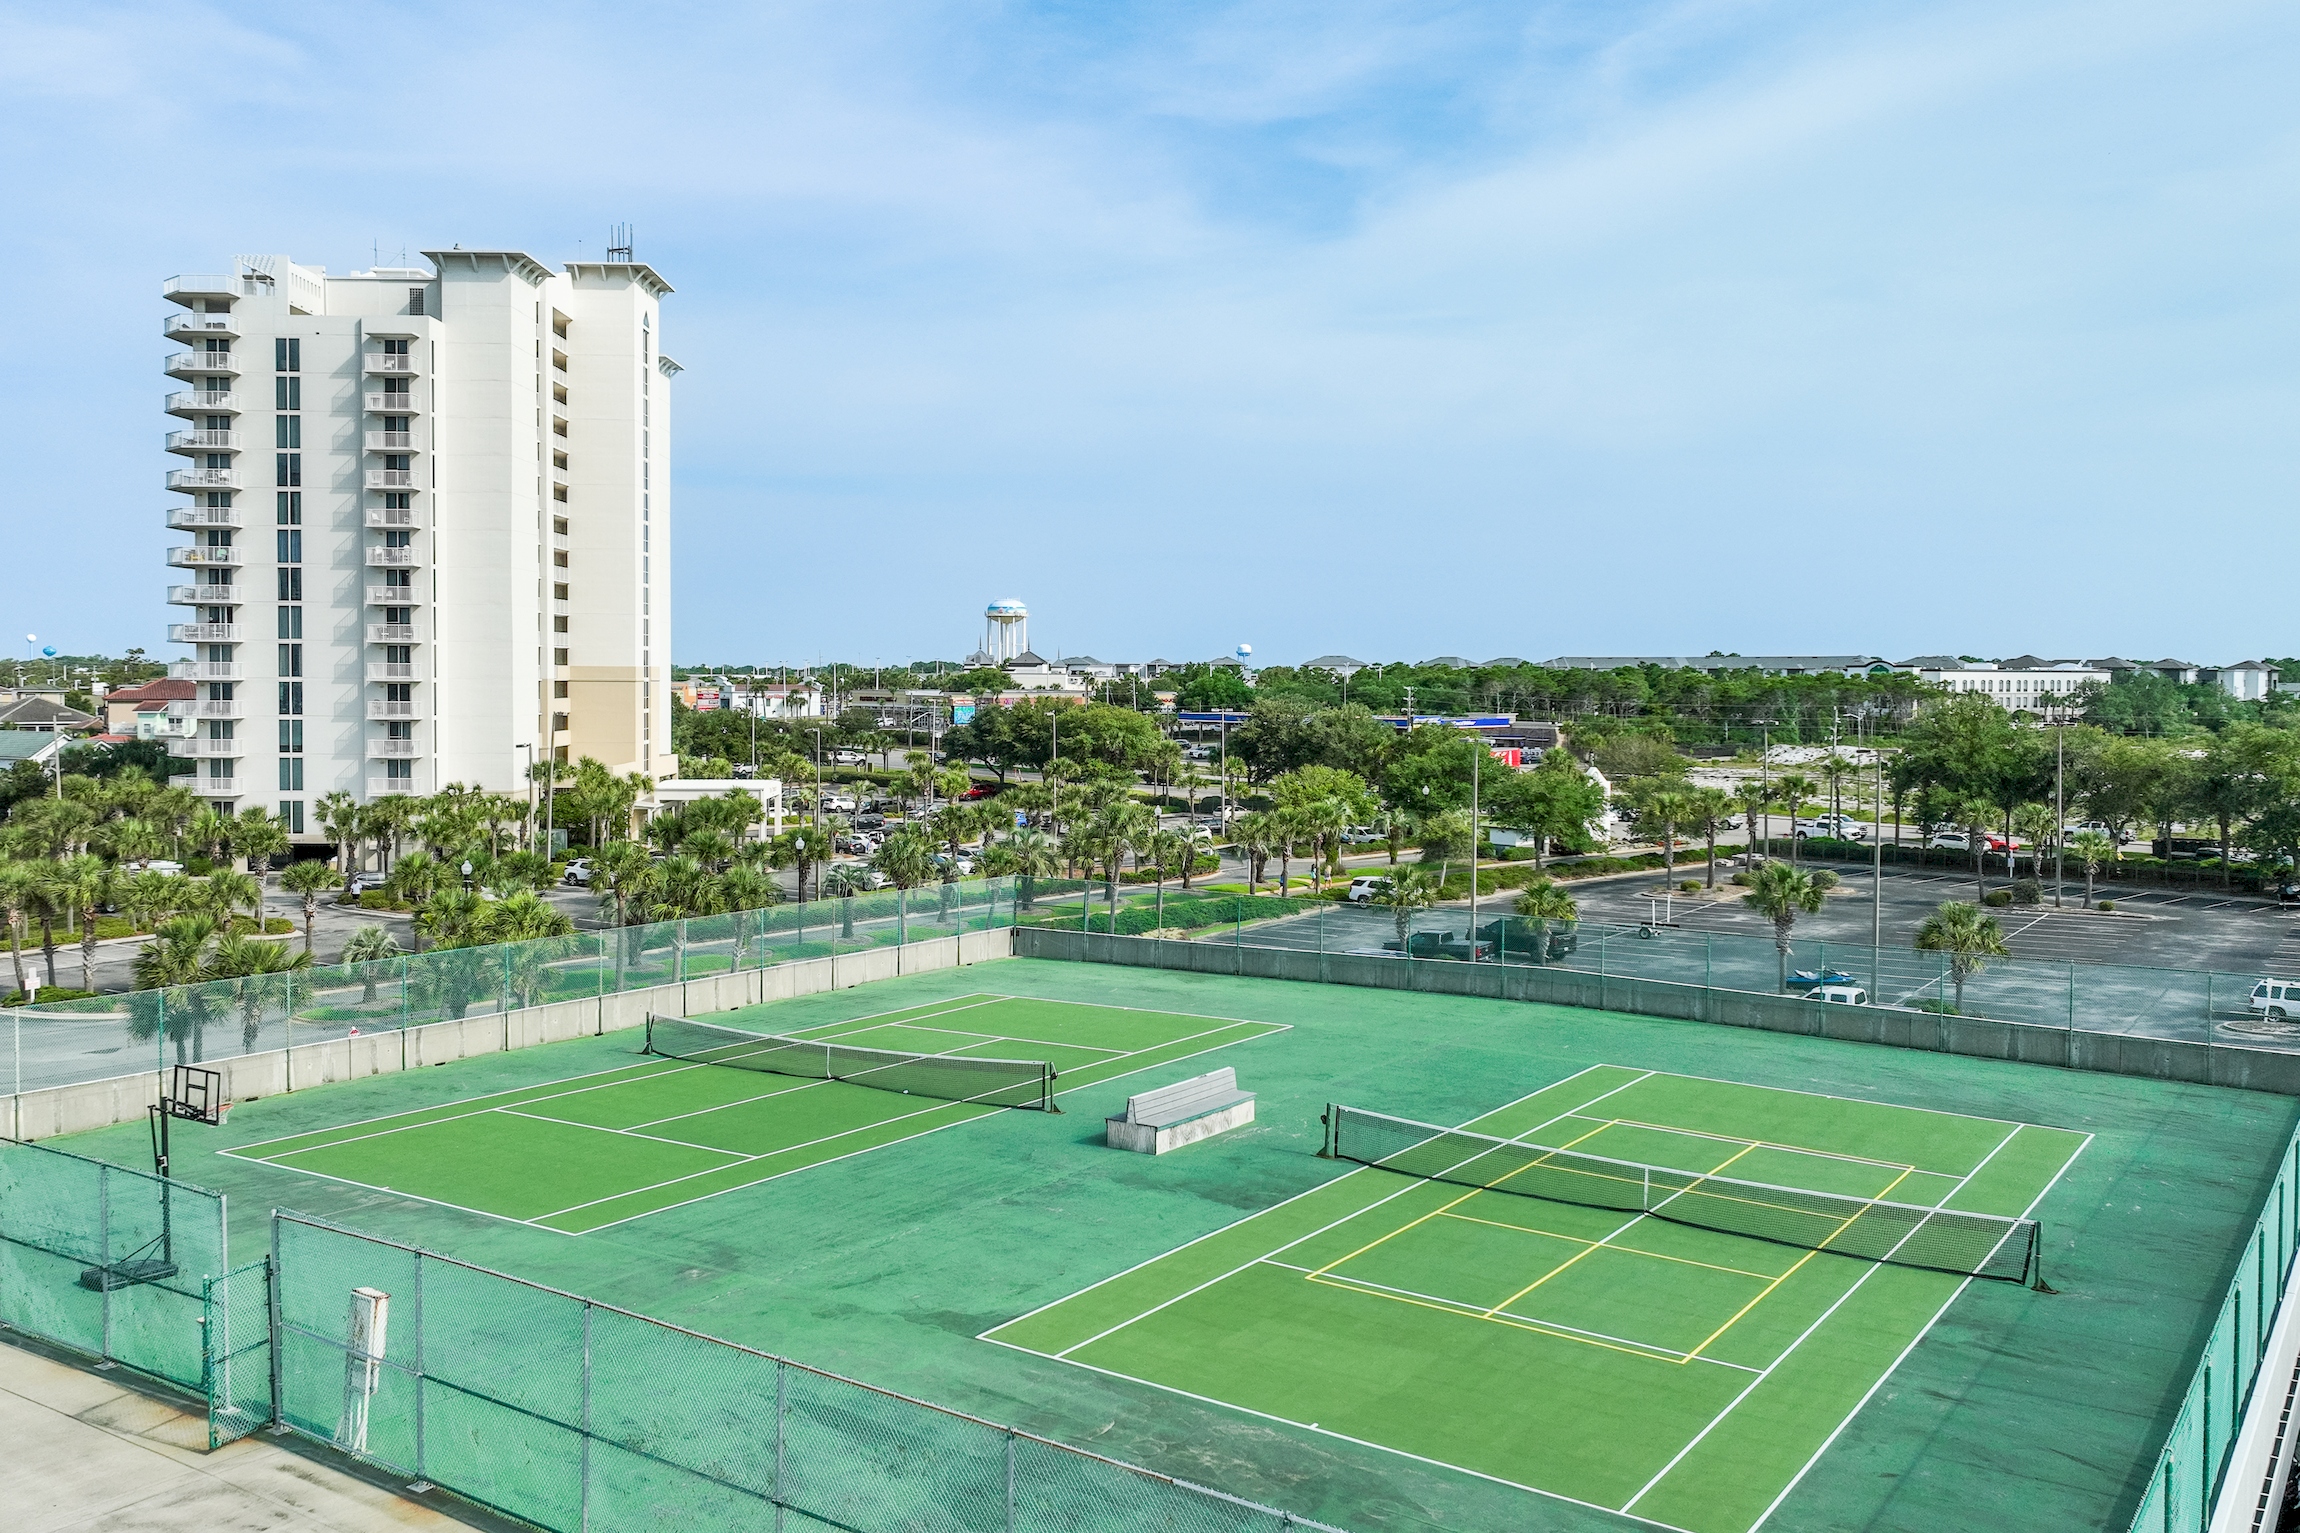 Tennis and Pickleball Courts, Basketball